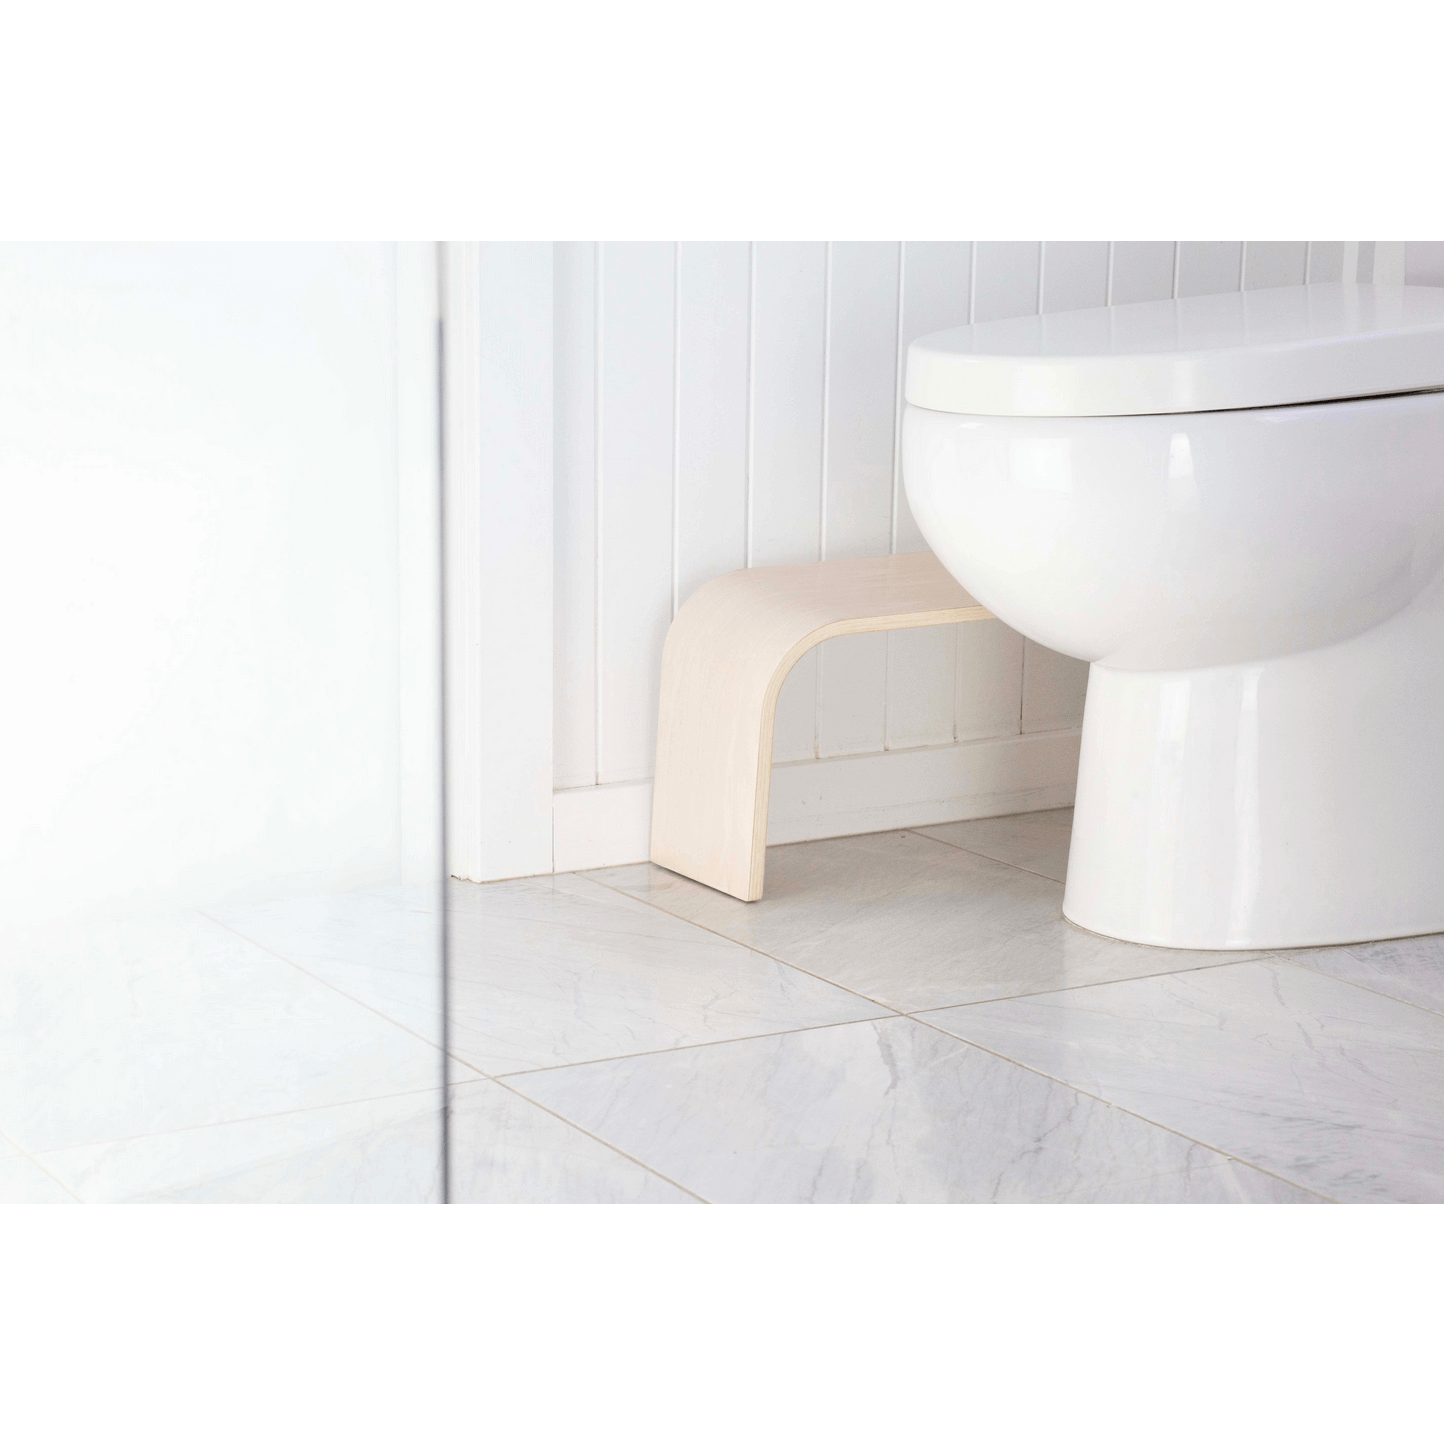 The PROPPR Timber - Whitewash Toilet Foot Stool - side view in a bathroom beside a toilet